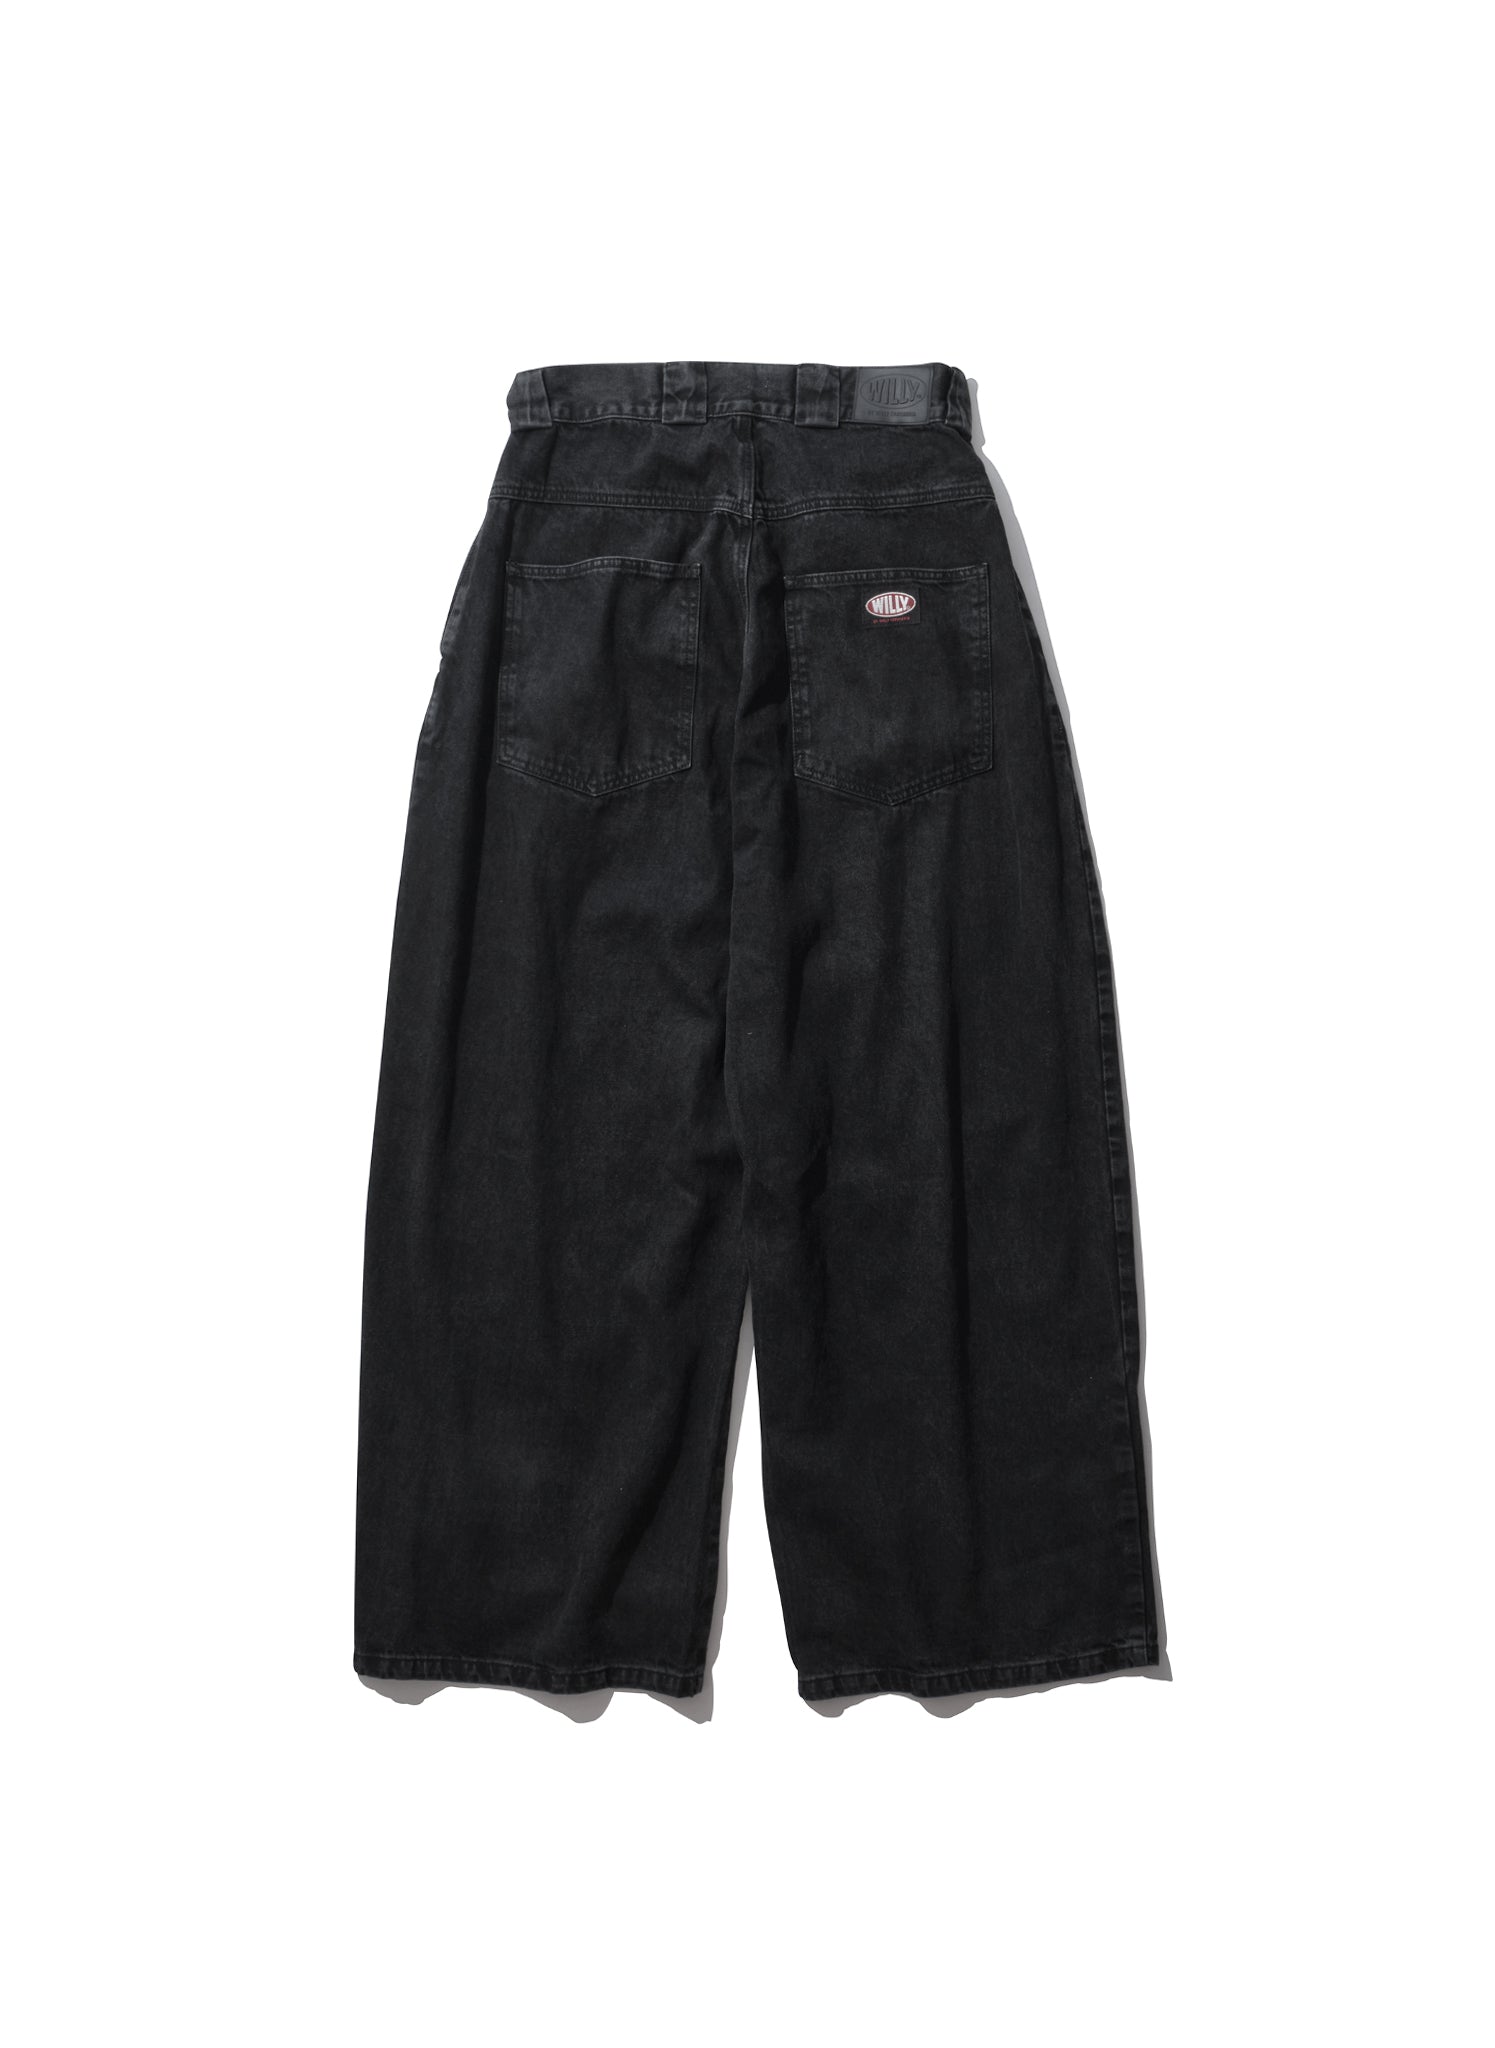 <span style="color: #f50b0b;">Last One</span> WILLY CHAVARRIA / SILVERLAKE TUCK JEAN WASHED BLACK